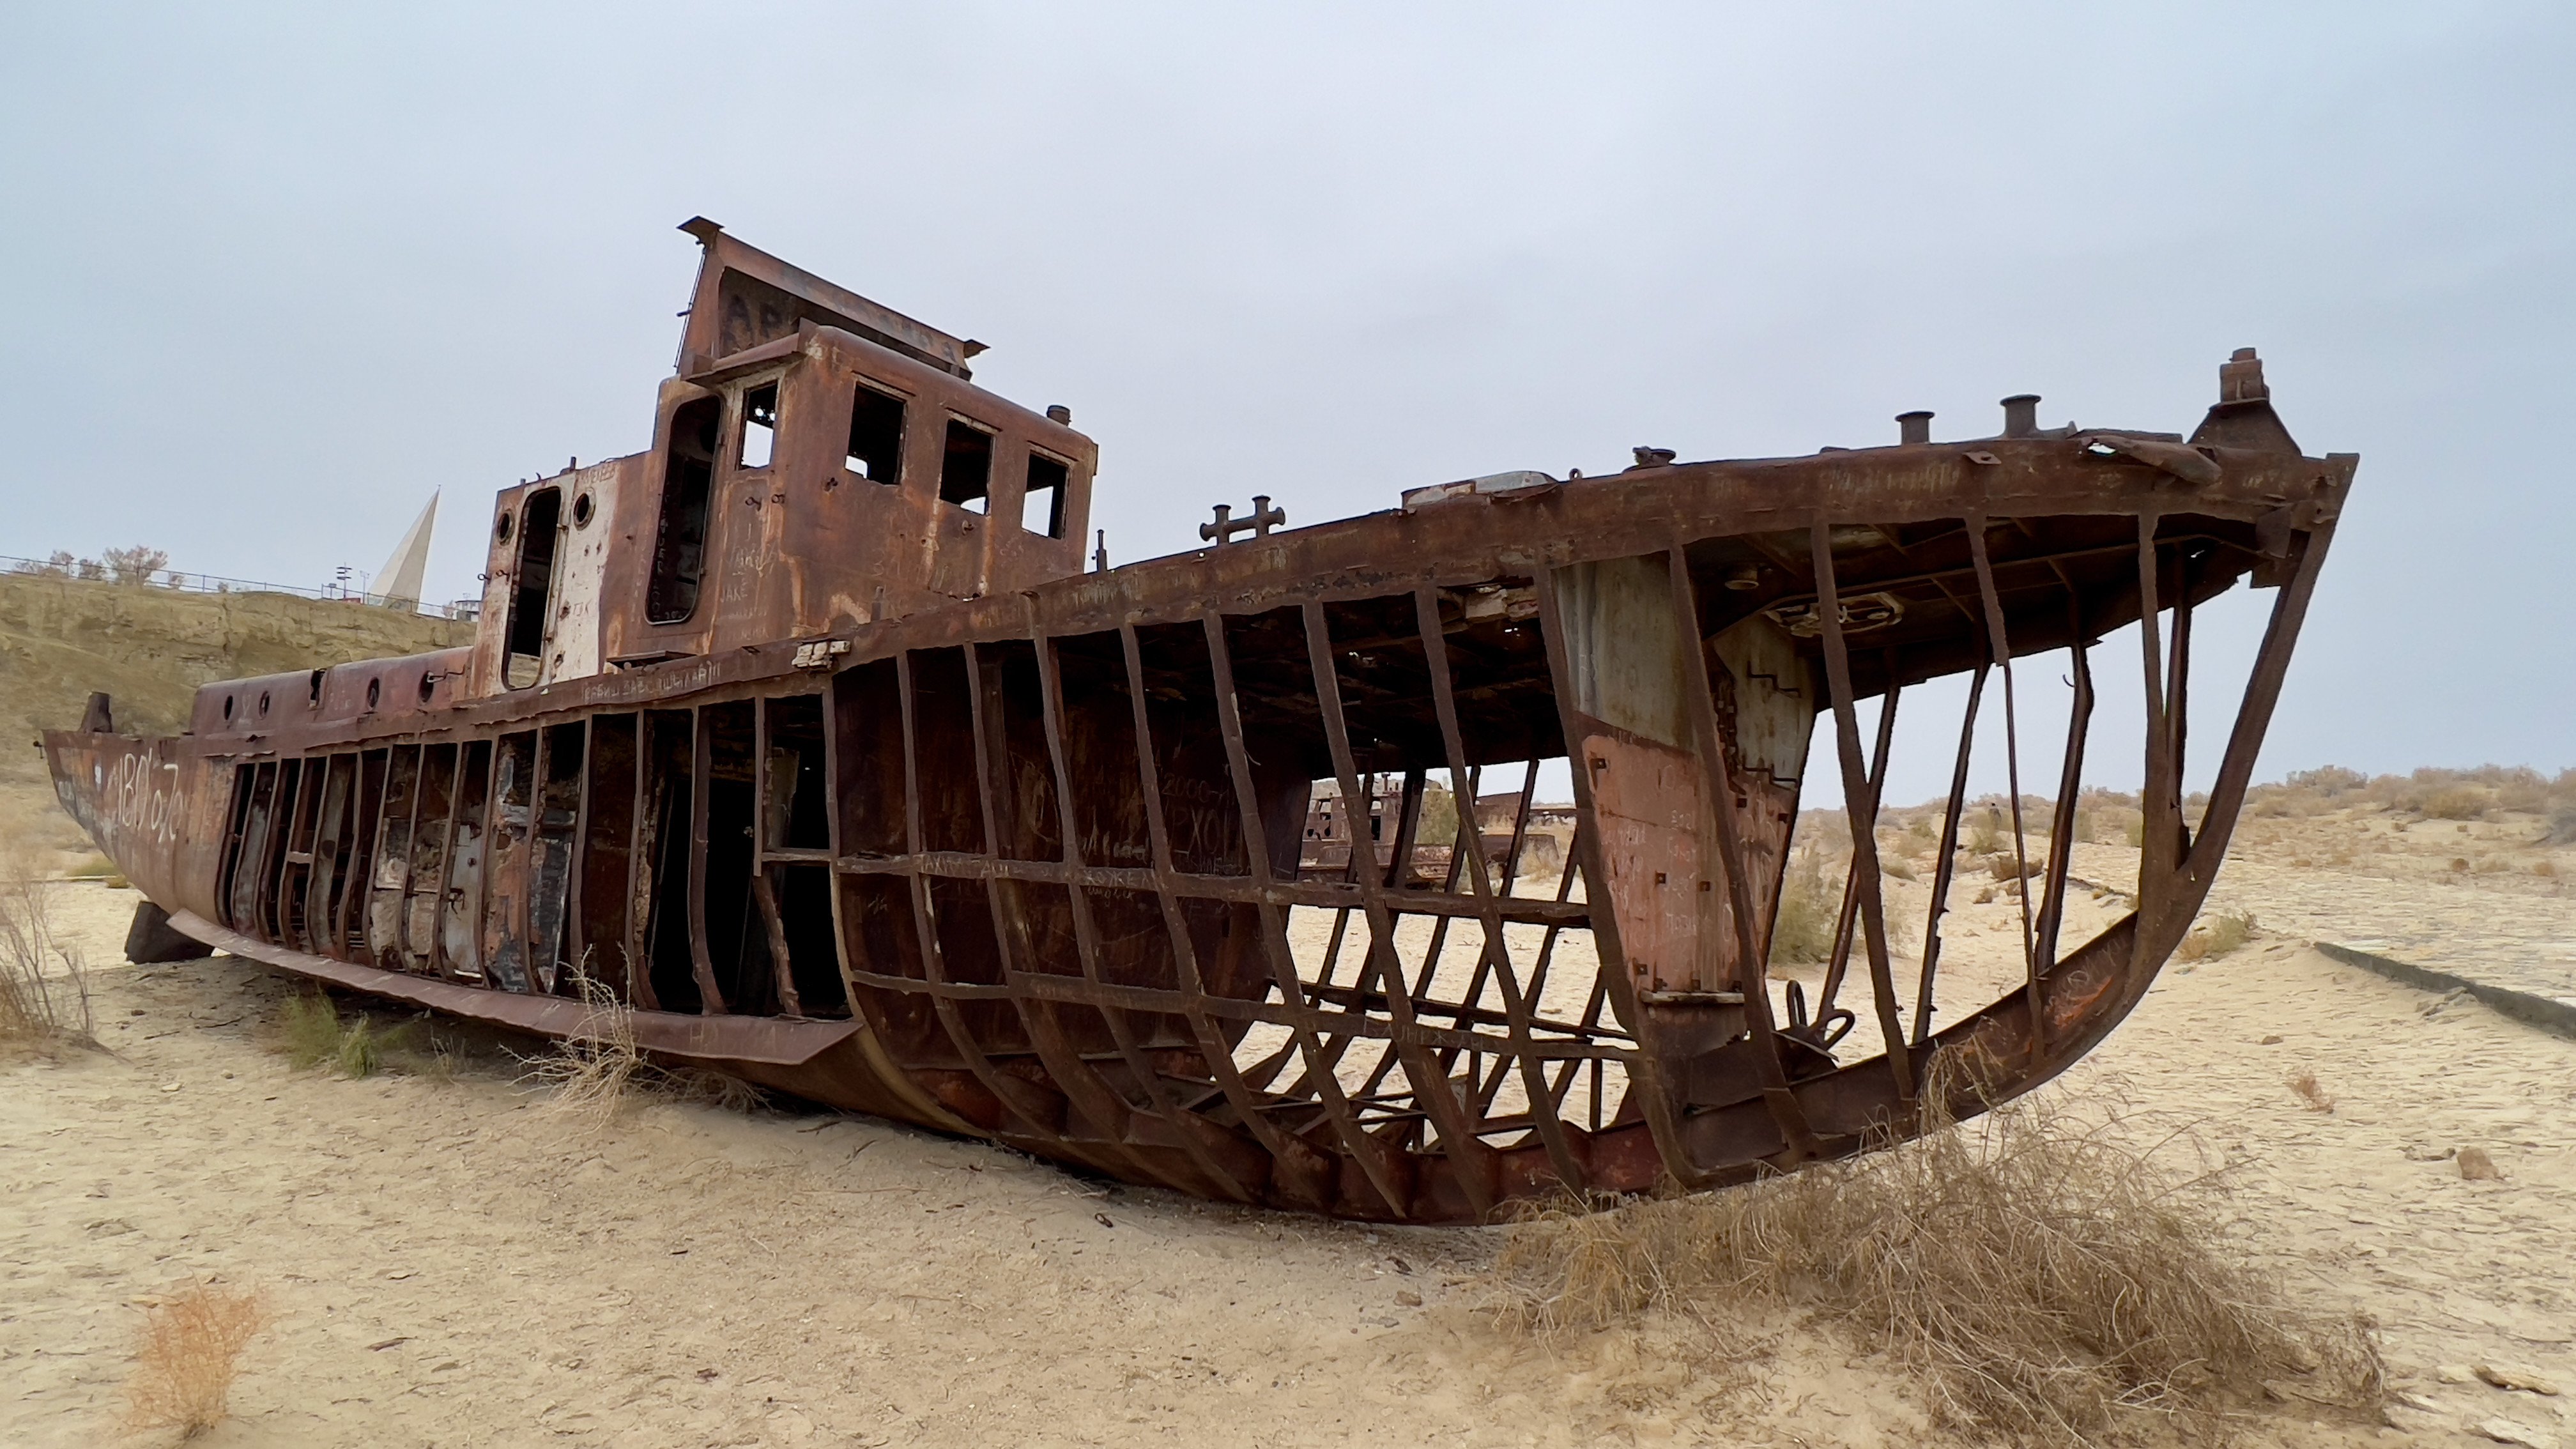 The shell of a fishing boat in the once lively town of Moynaq, in Uzbekistan. The Aral Sea’s slow destruction devastated the community, but now offers Instagrammable photo opportunities for disaster-tourism enthusiasts. Photo: Peter Neville-Hadley